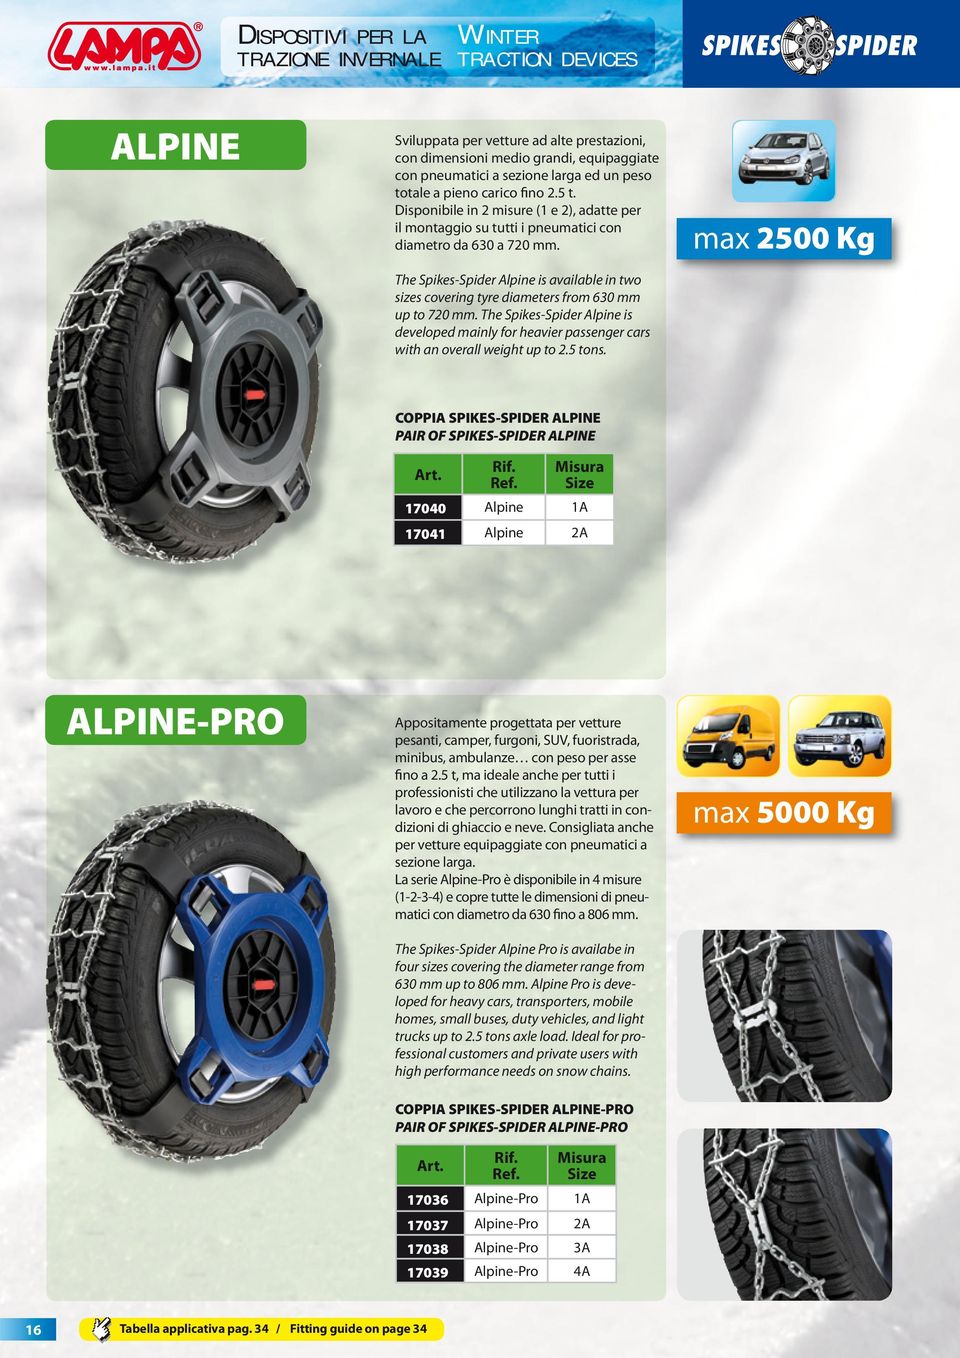 The Spikes-Spider Alpine is available in two sizes covering tyre diameters from 630 mm up to 720 mm.